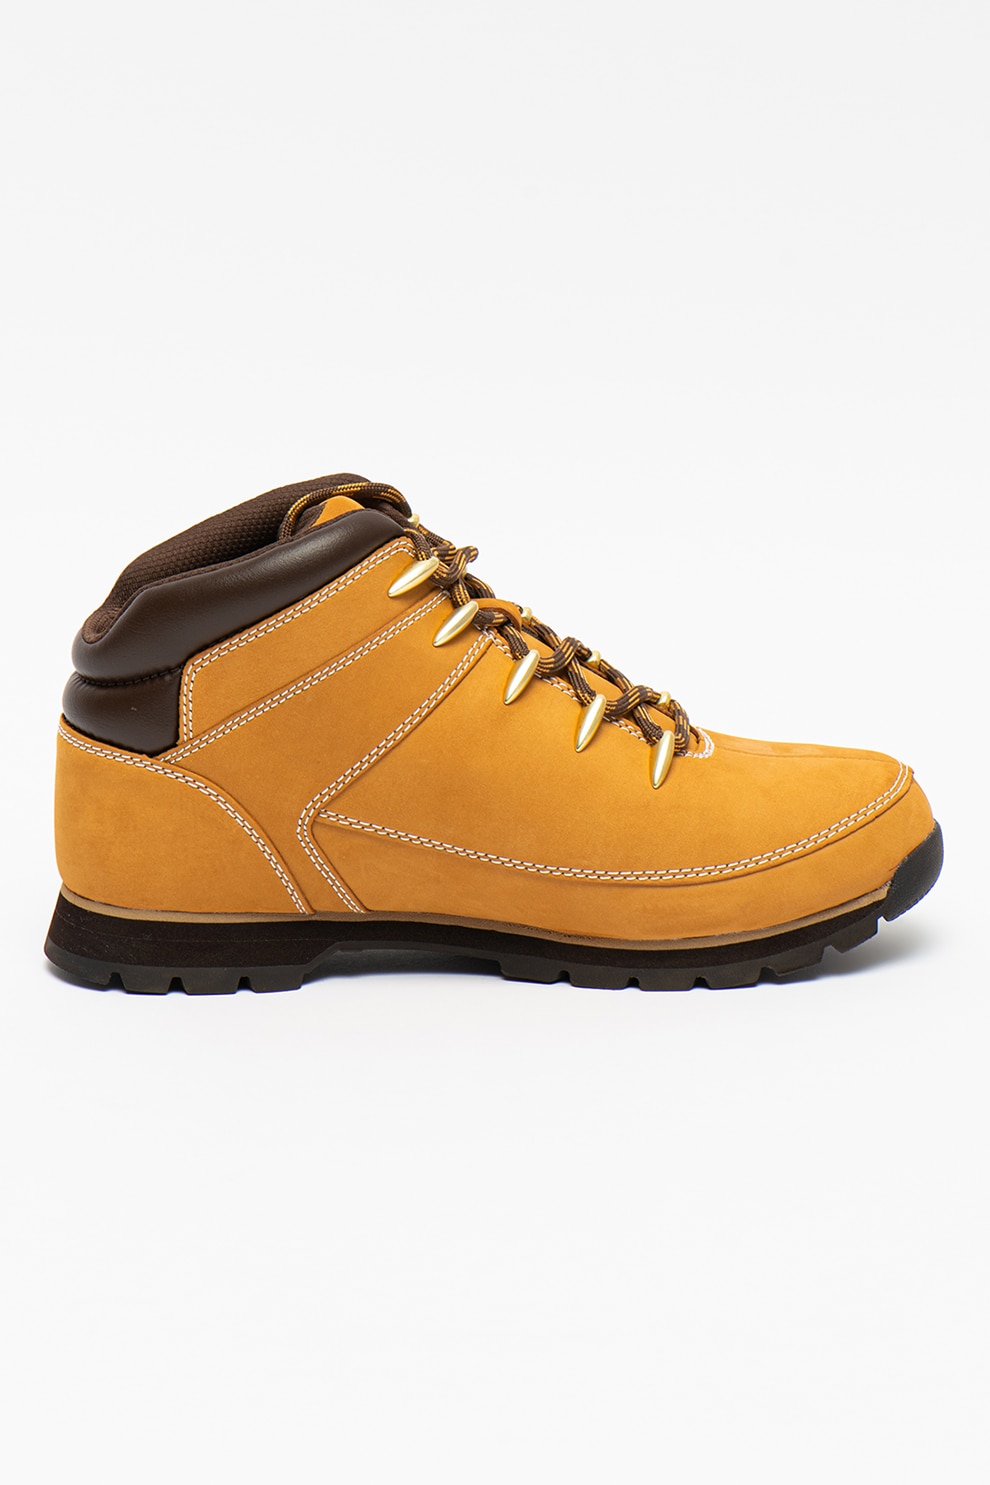 cleaner philosophy The guests Timberland, Ghete de piele Euro Sprint Hiker - eMAG.ro